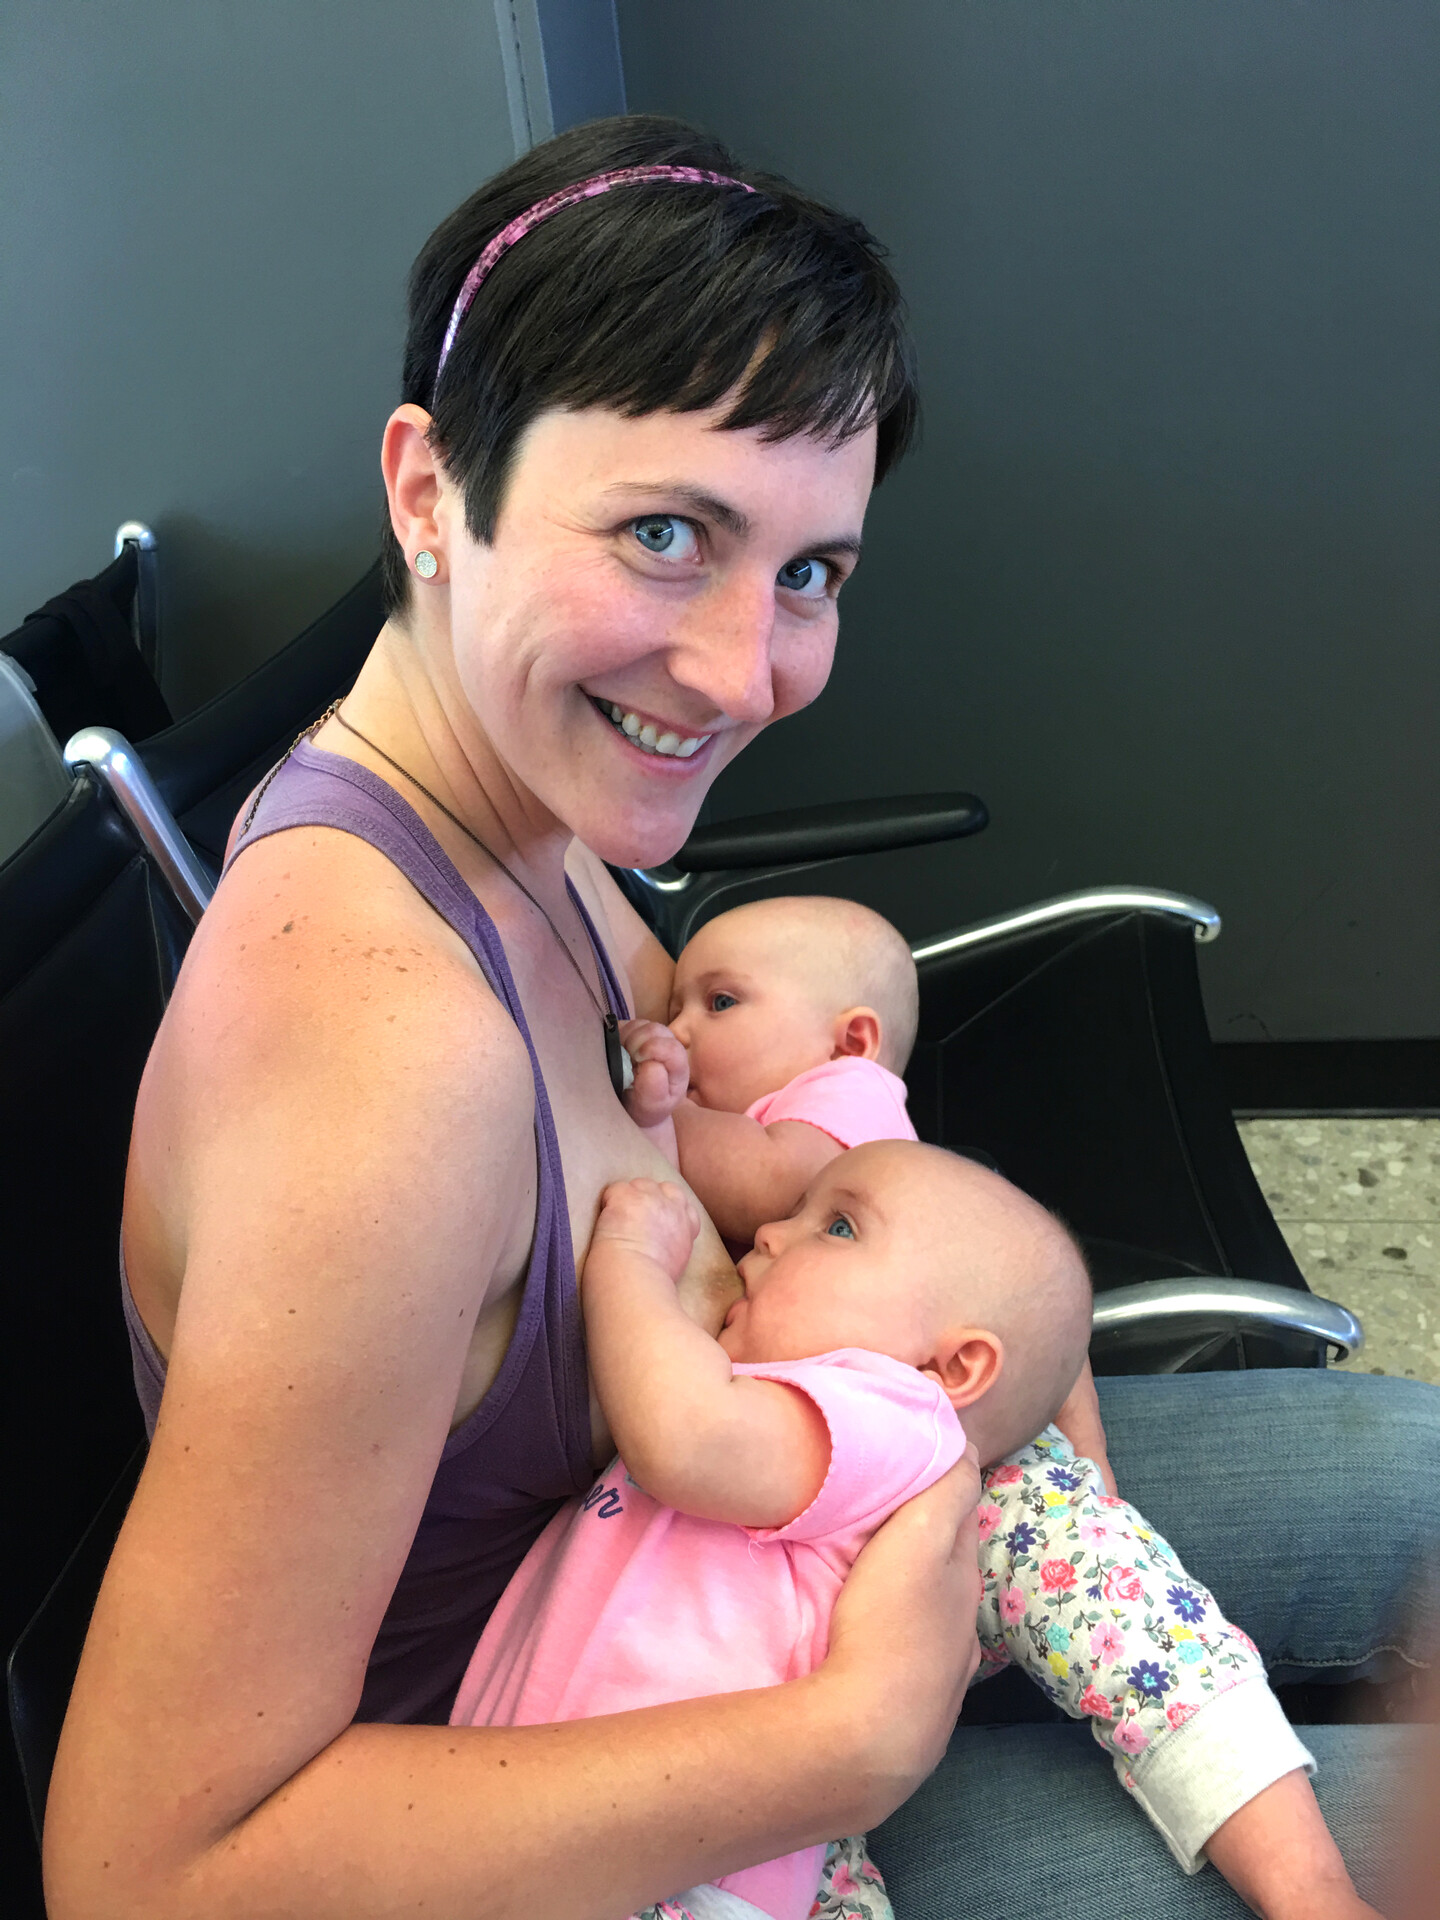 Why Should Businesses Support Breastfeeding Moms at Work? - StoryMD